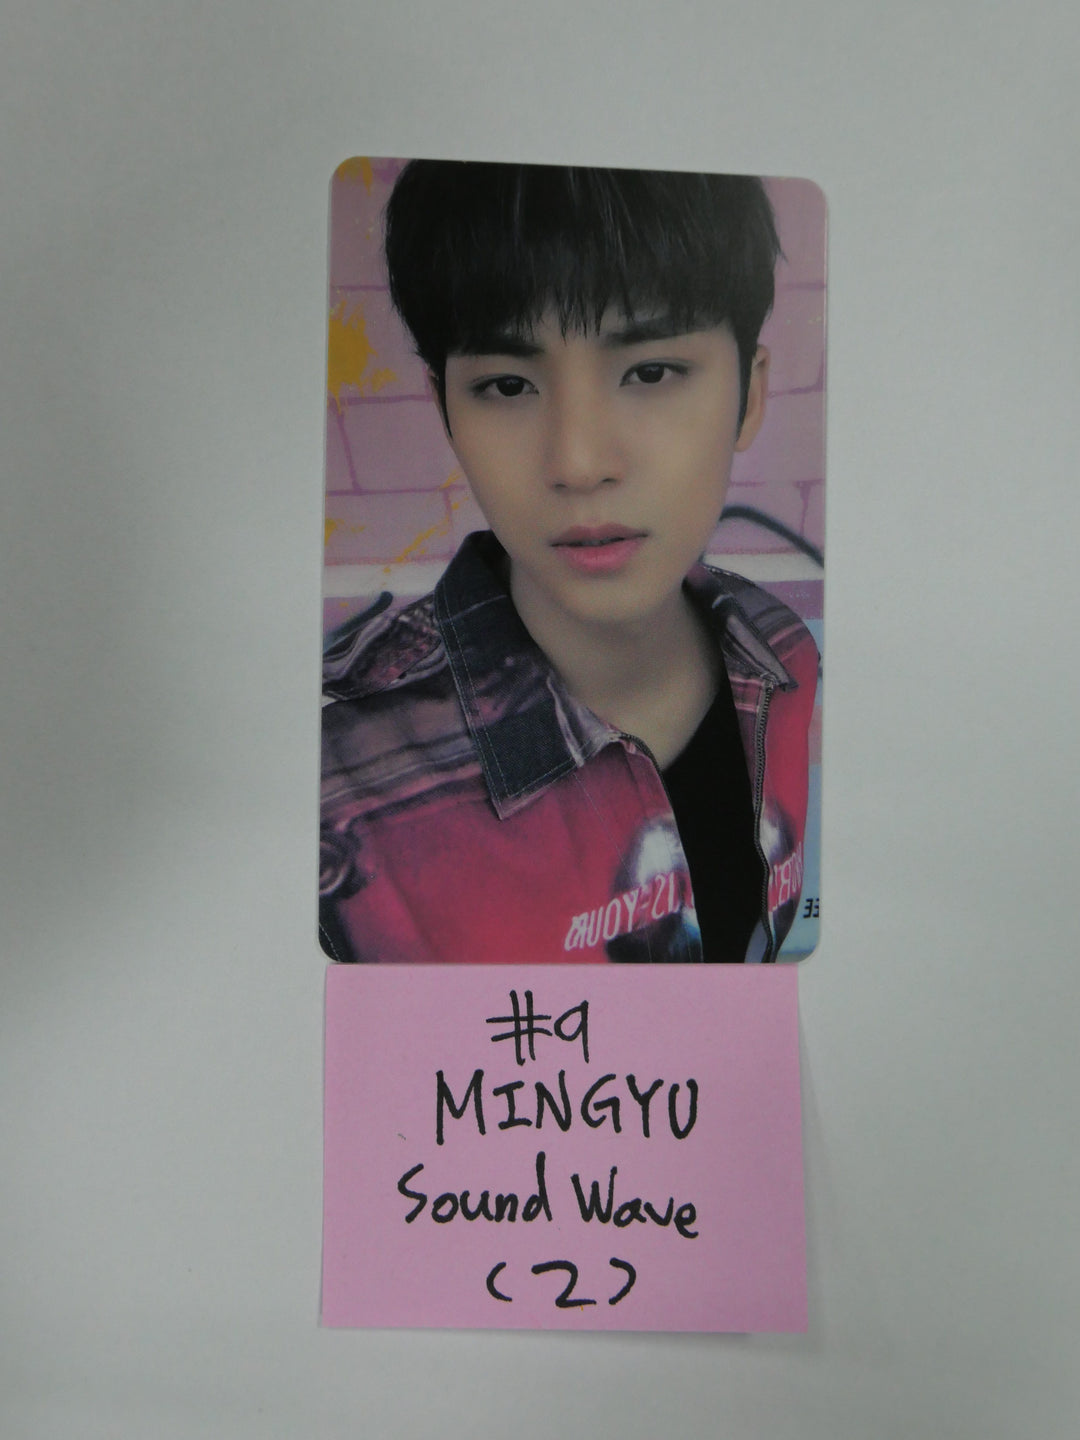 Seventeen 'Your Choice' - SoundWave Lucky Draw Plastic Photocard Round 2